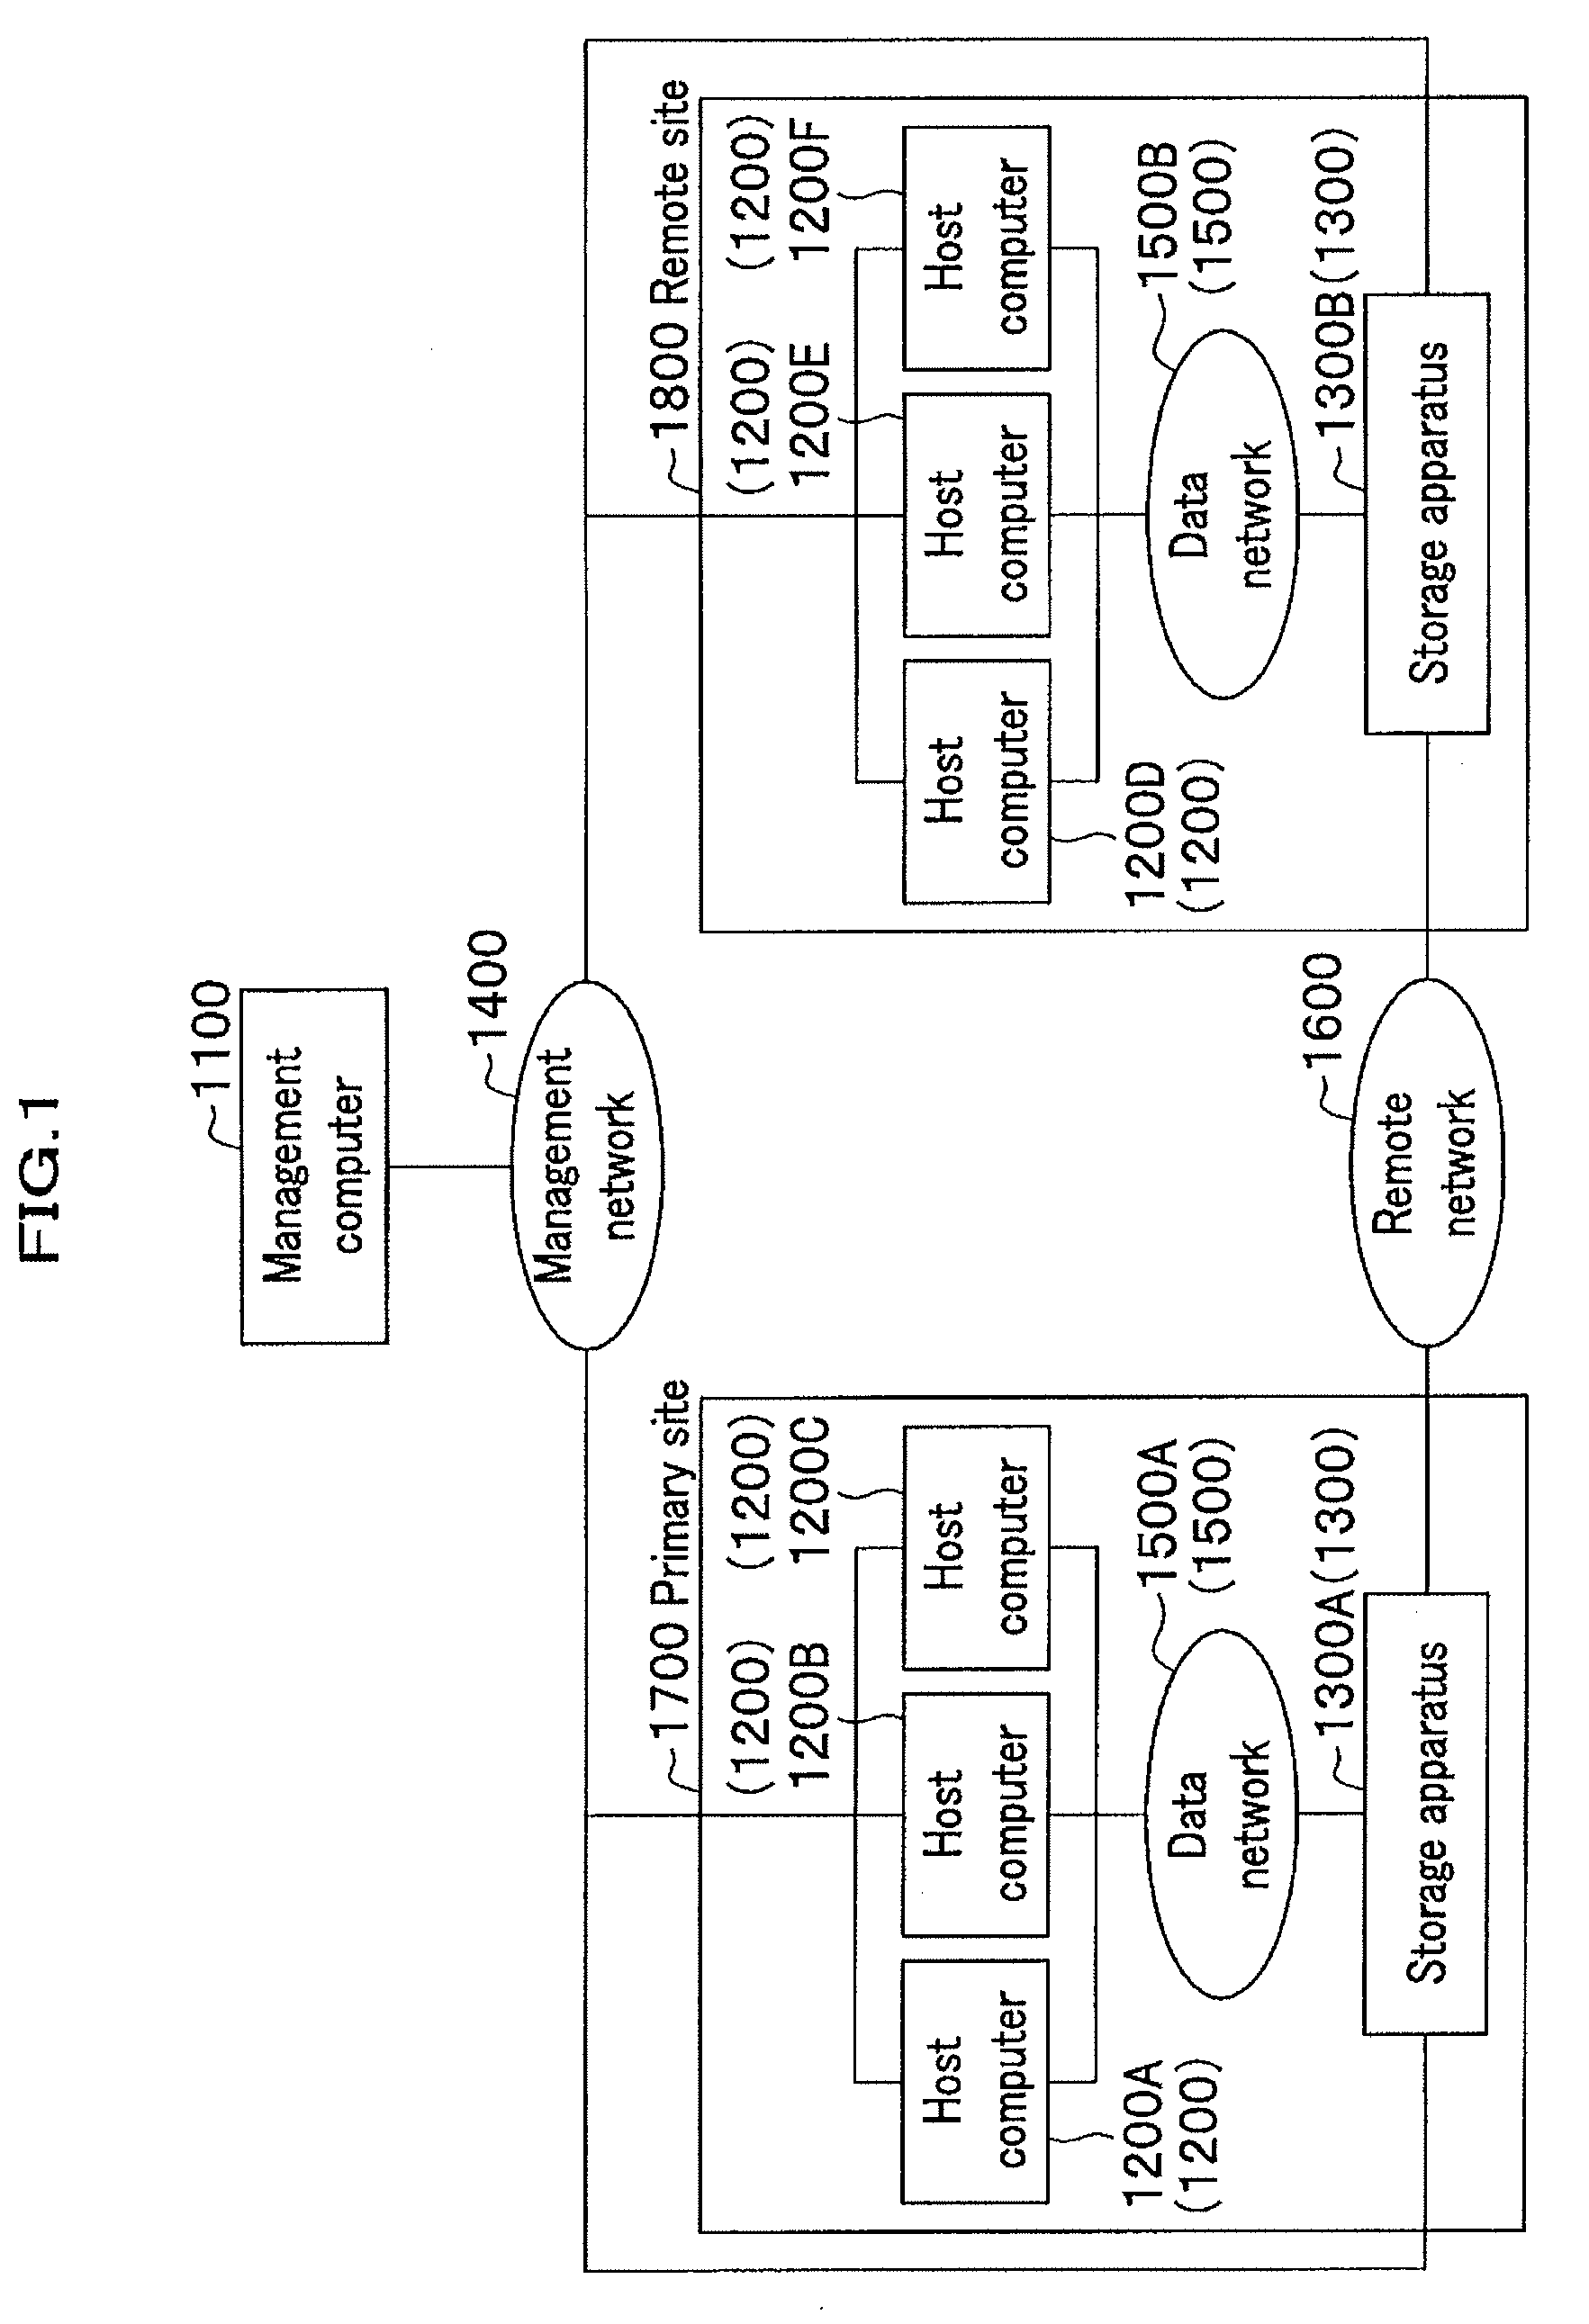 Method of constructing replication environment and storage system